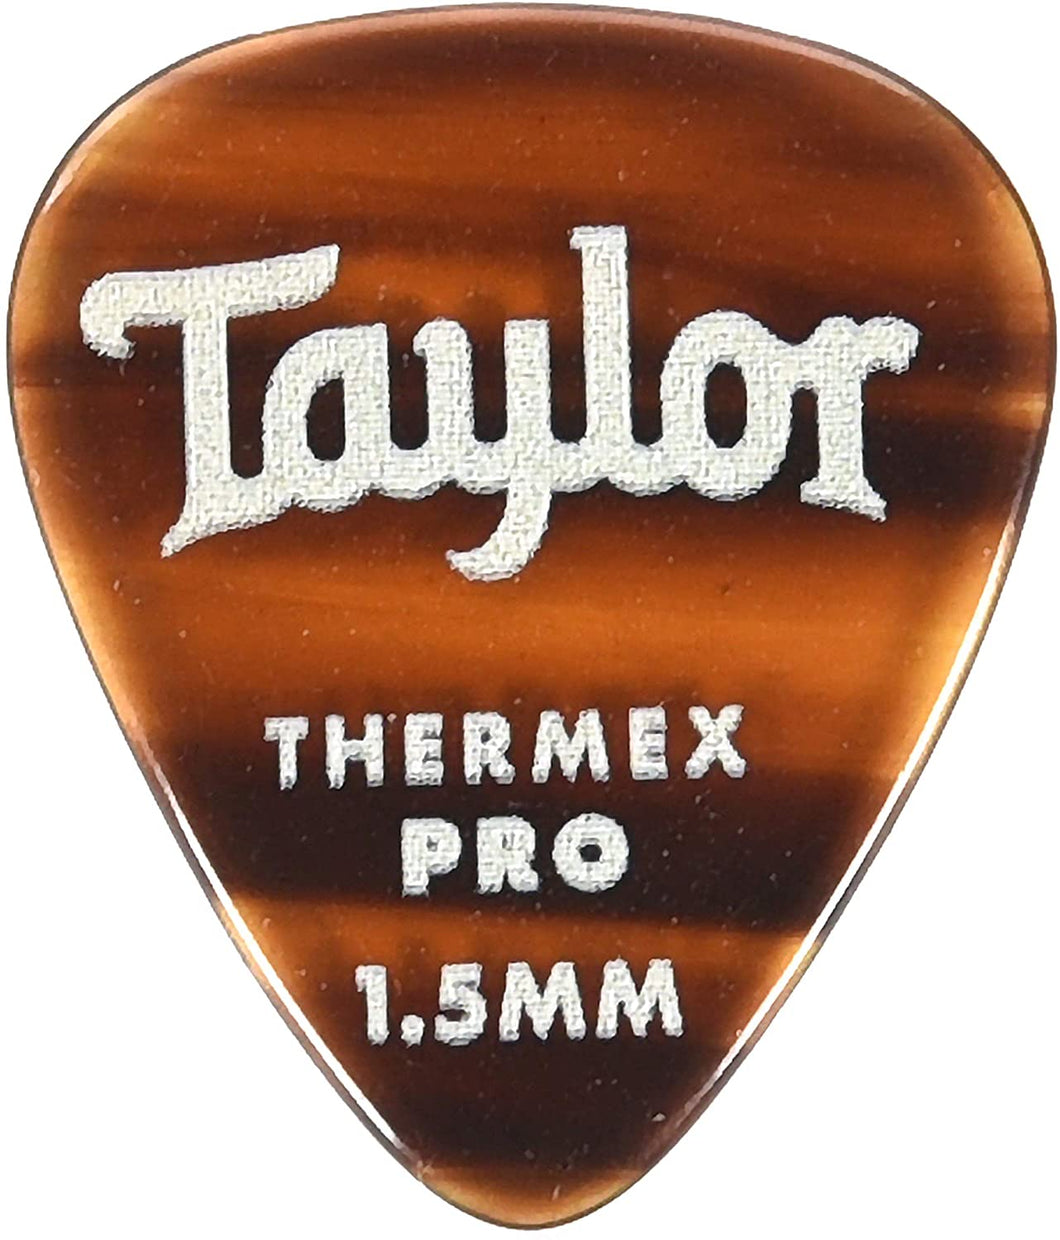 Taylor Picks - Celluloid 351, Thermex Pro Tortoise Shell 1.5 mm, 6 Pack